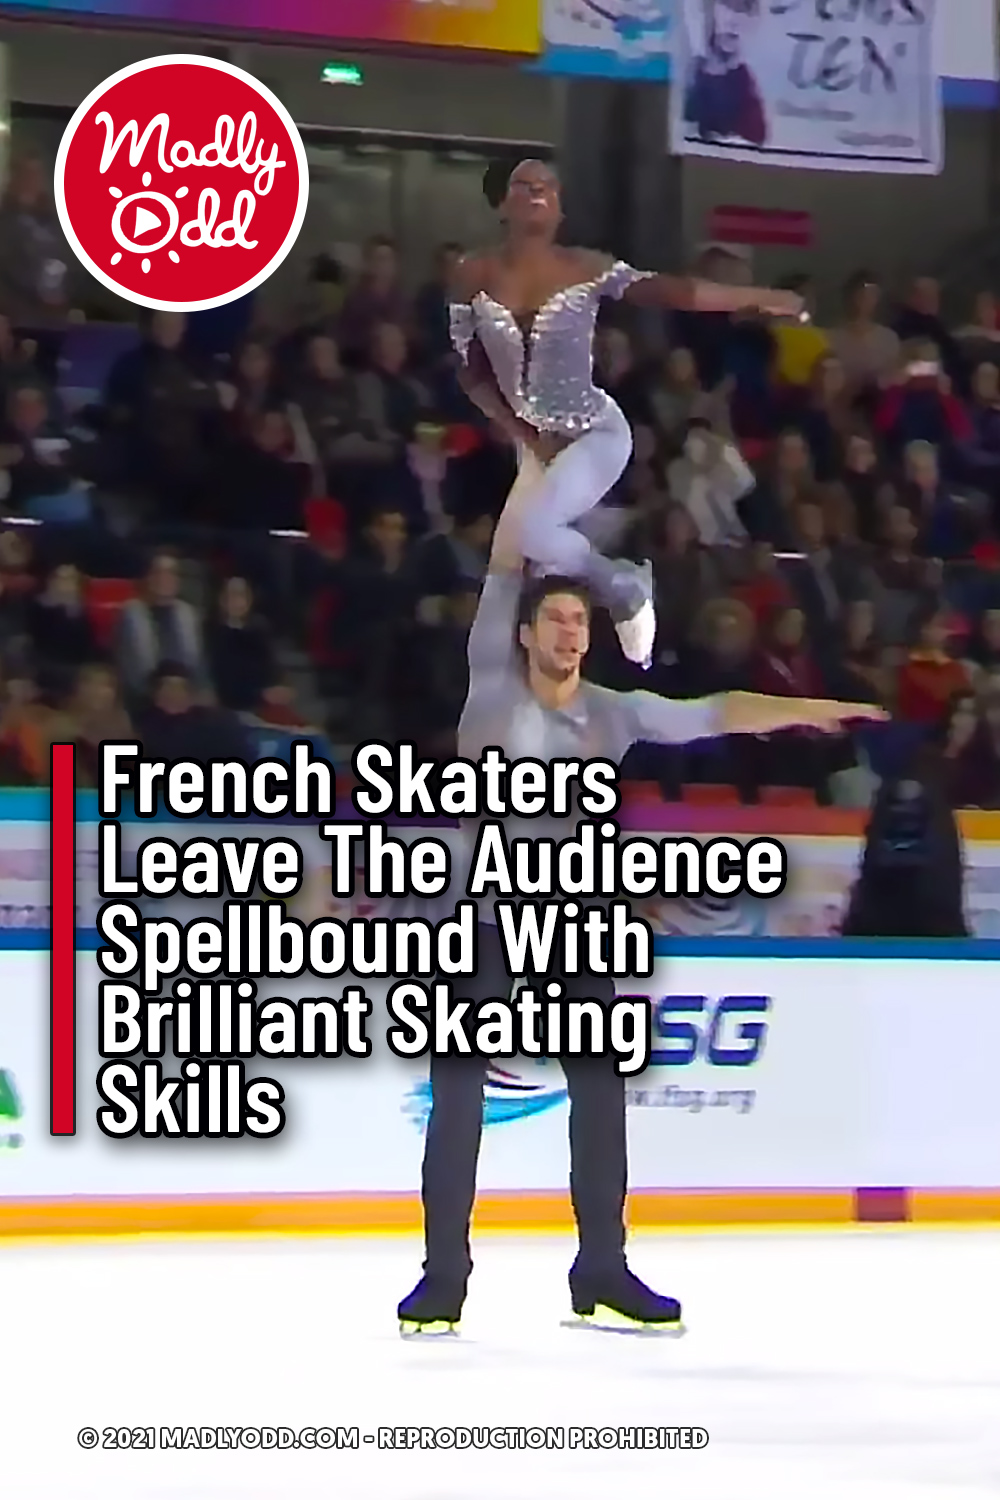 French Skaters Leave The Audience Spellbound With Brilliant Skating Skills